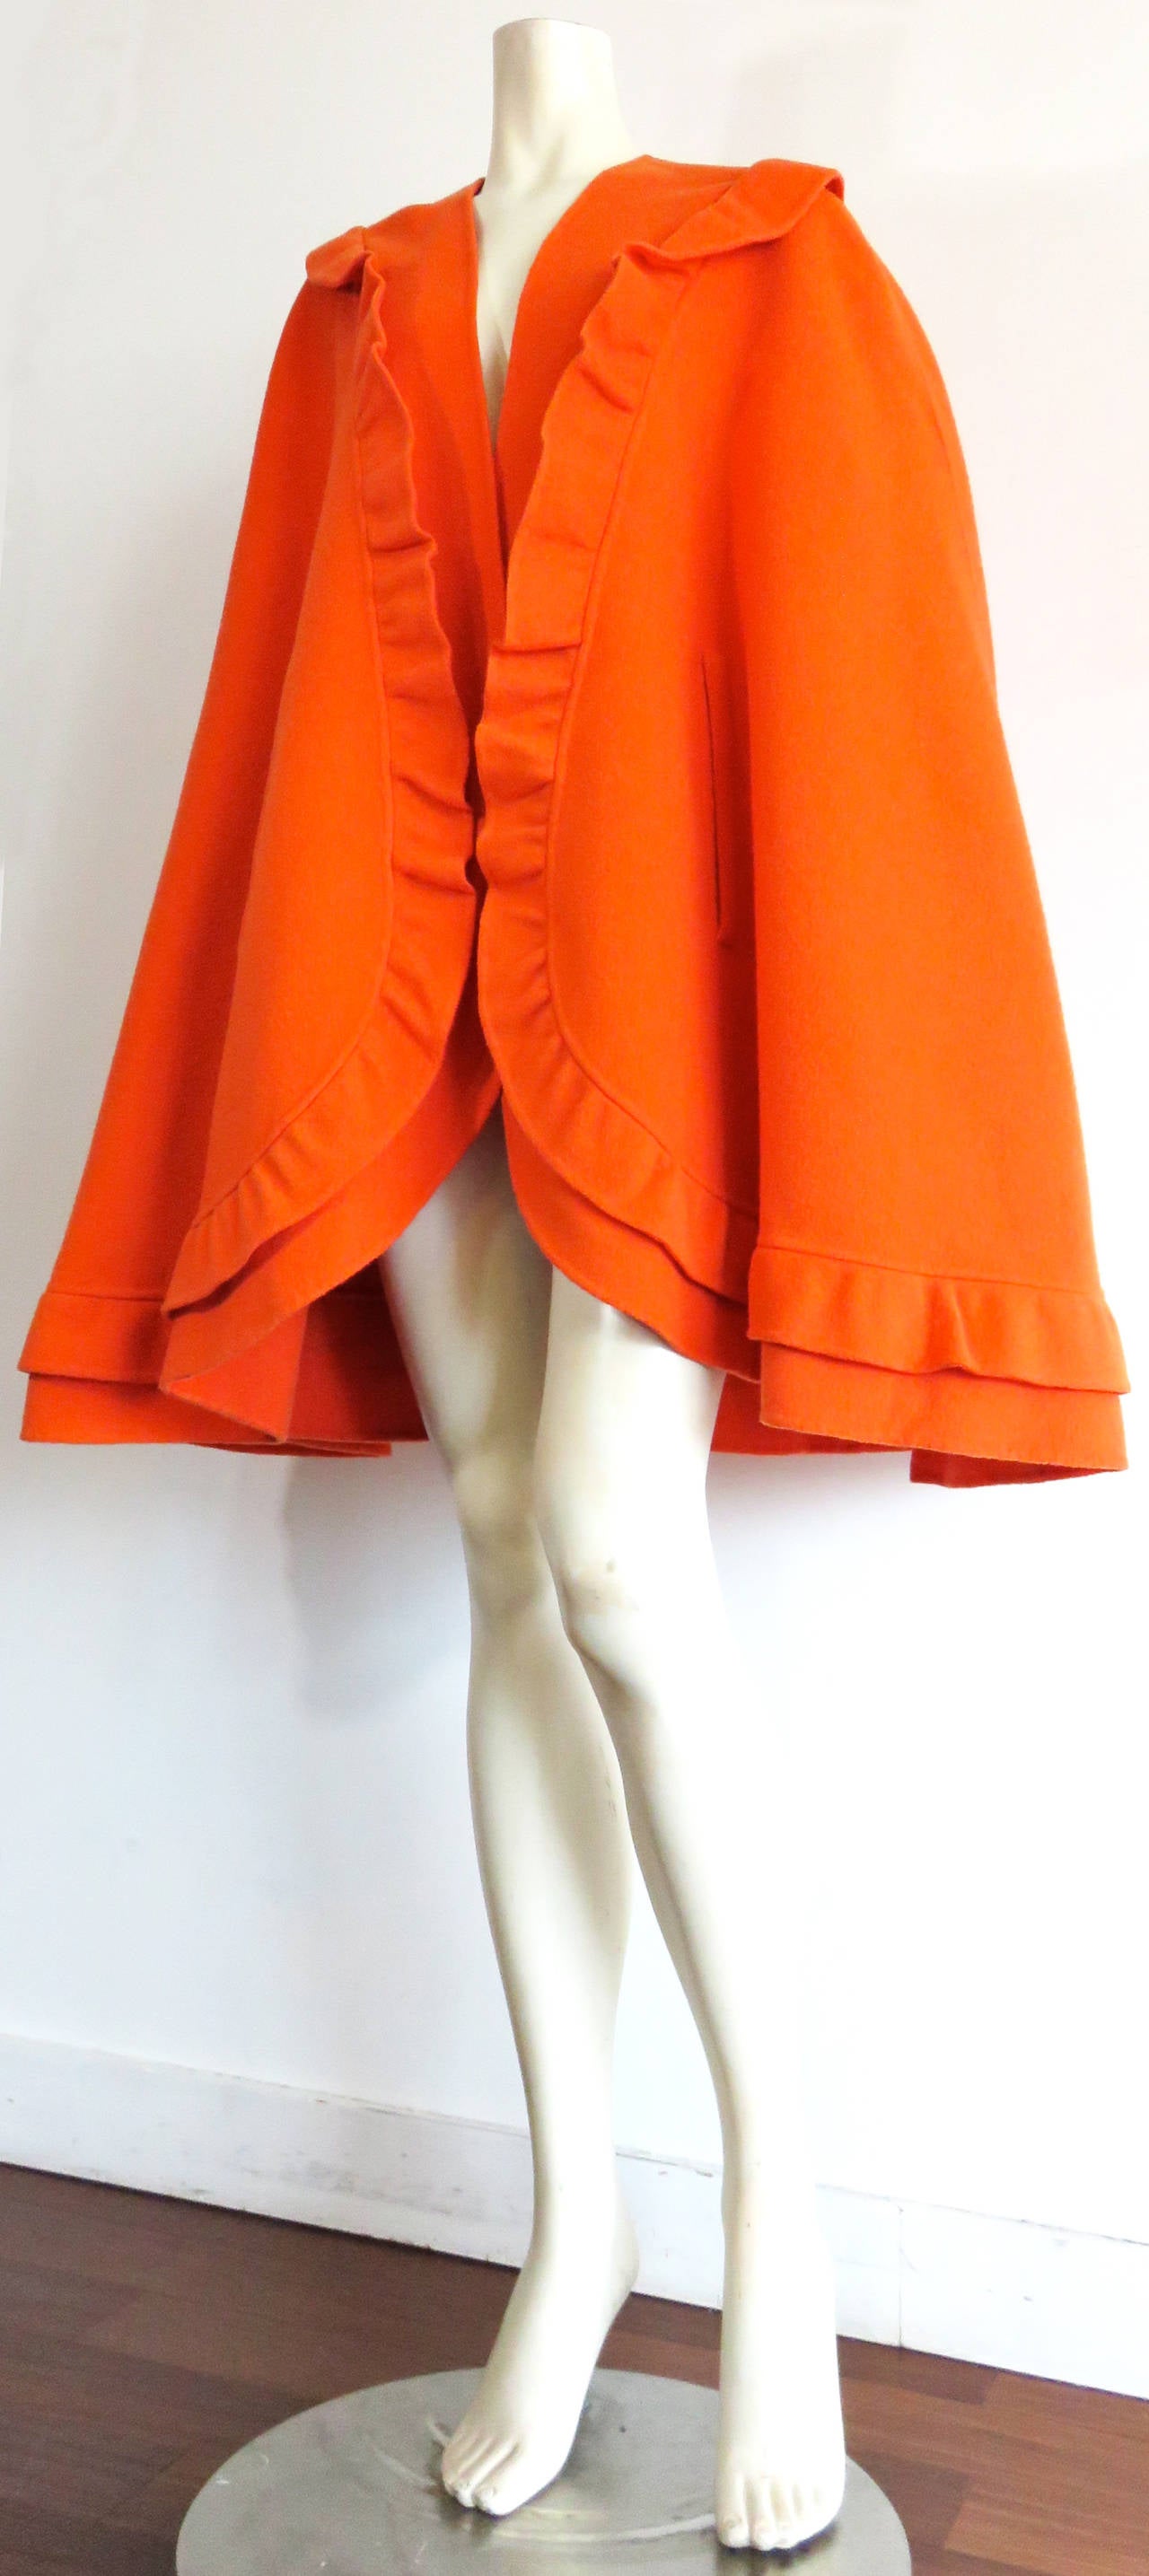 Excellent condition, 1980's MILA SCHON tangerine wool, ruffle detail cape.

Gorgeous curved hem shape with ruffle detail border.

Open-front design with waist-level, hand slot openings.

Made in Italy, as labeled.

In excellent condition